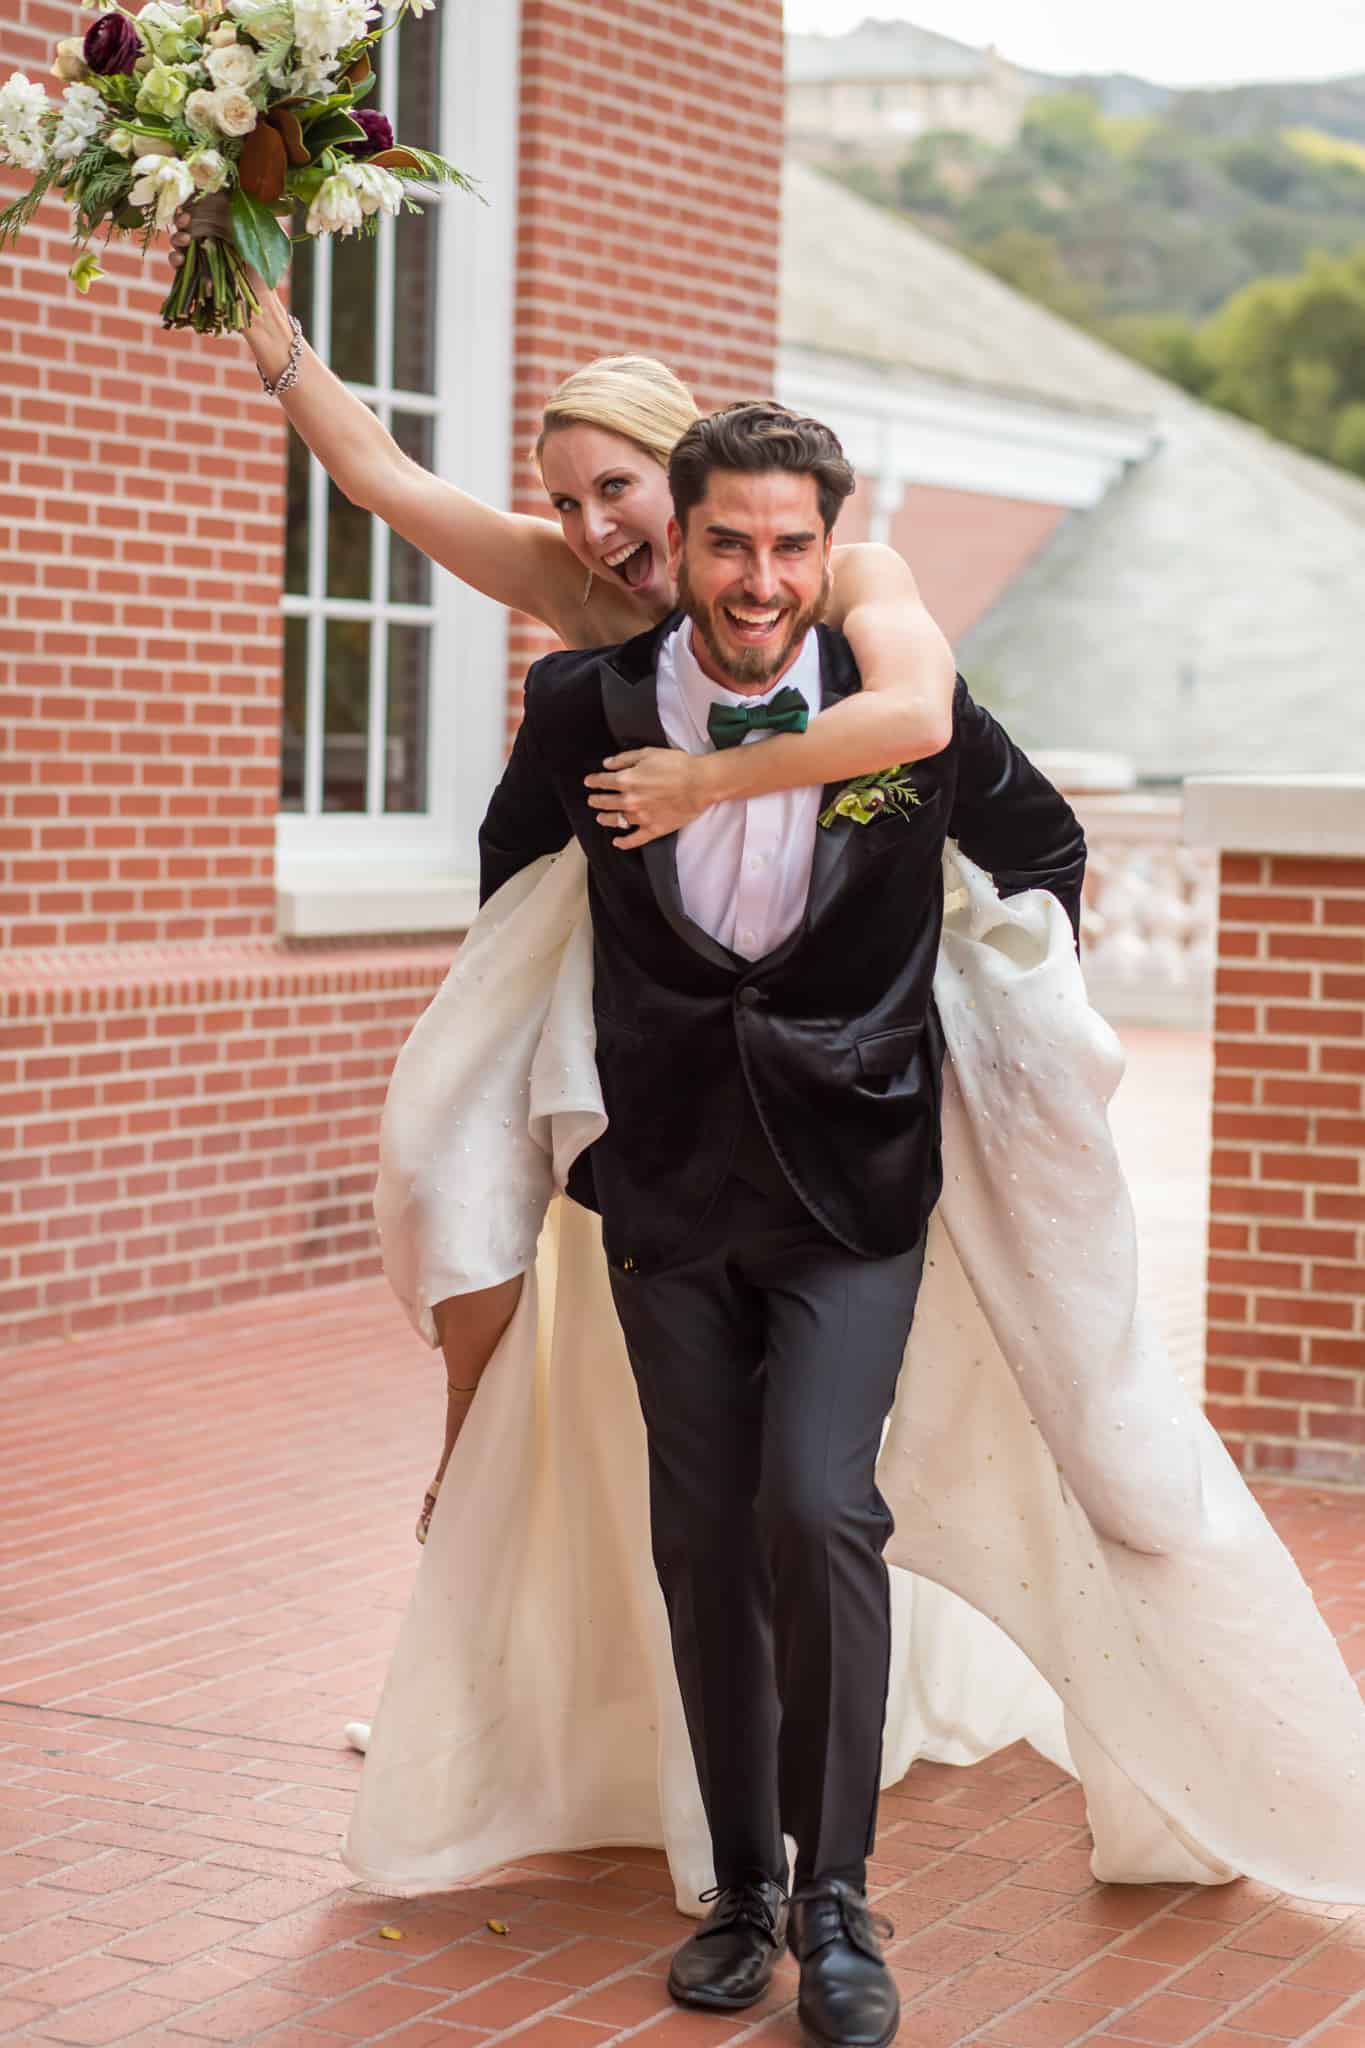 candid wedding photo off bride on grooms back as he carries her over a patio